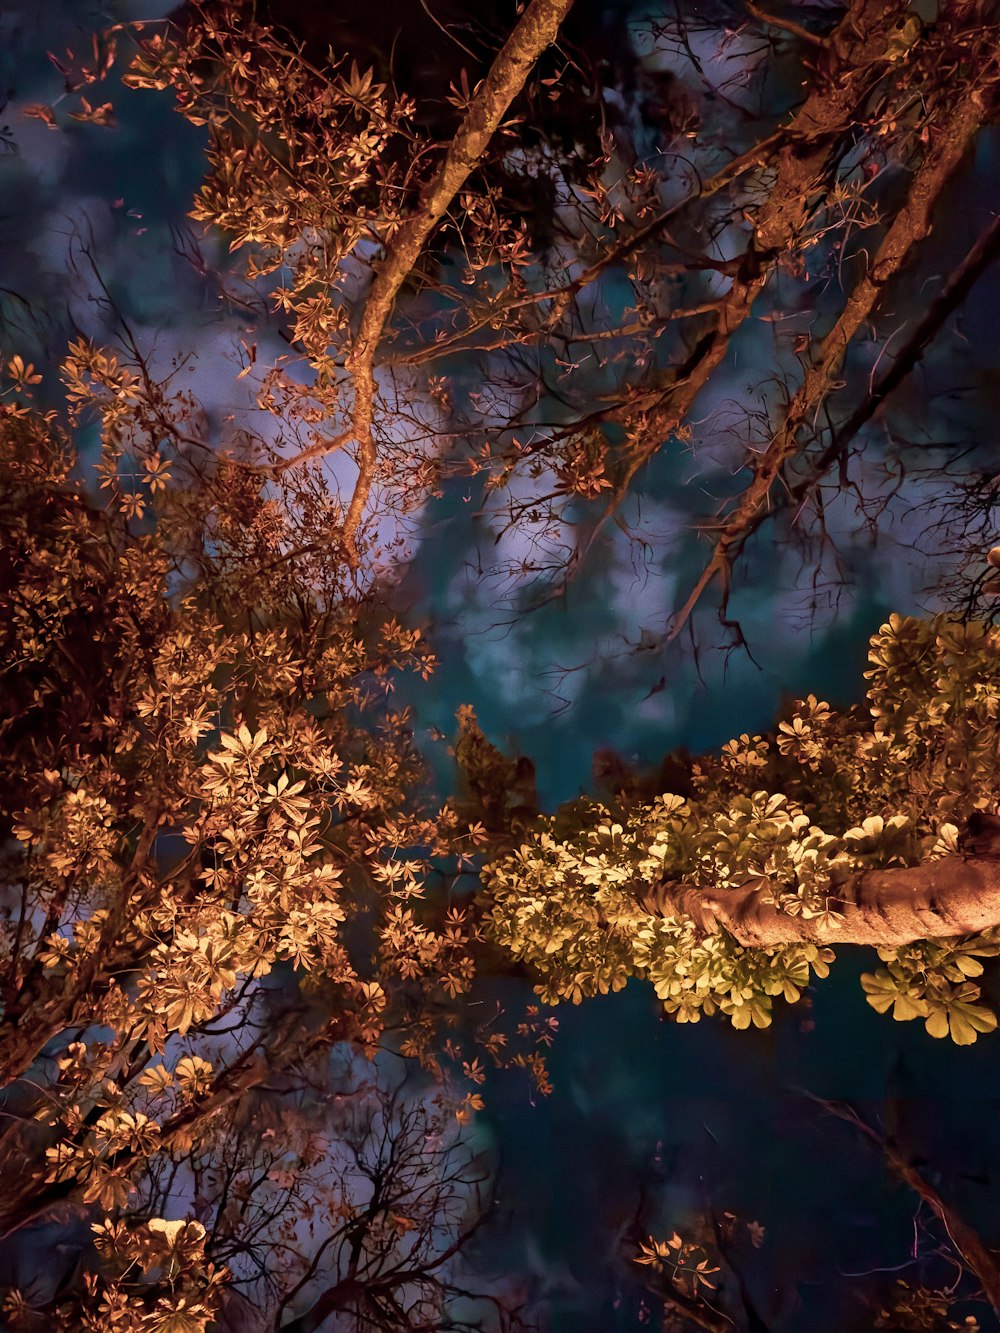 a view of the night sky through the branches of a tree